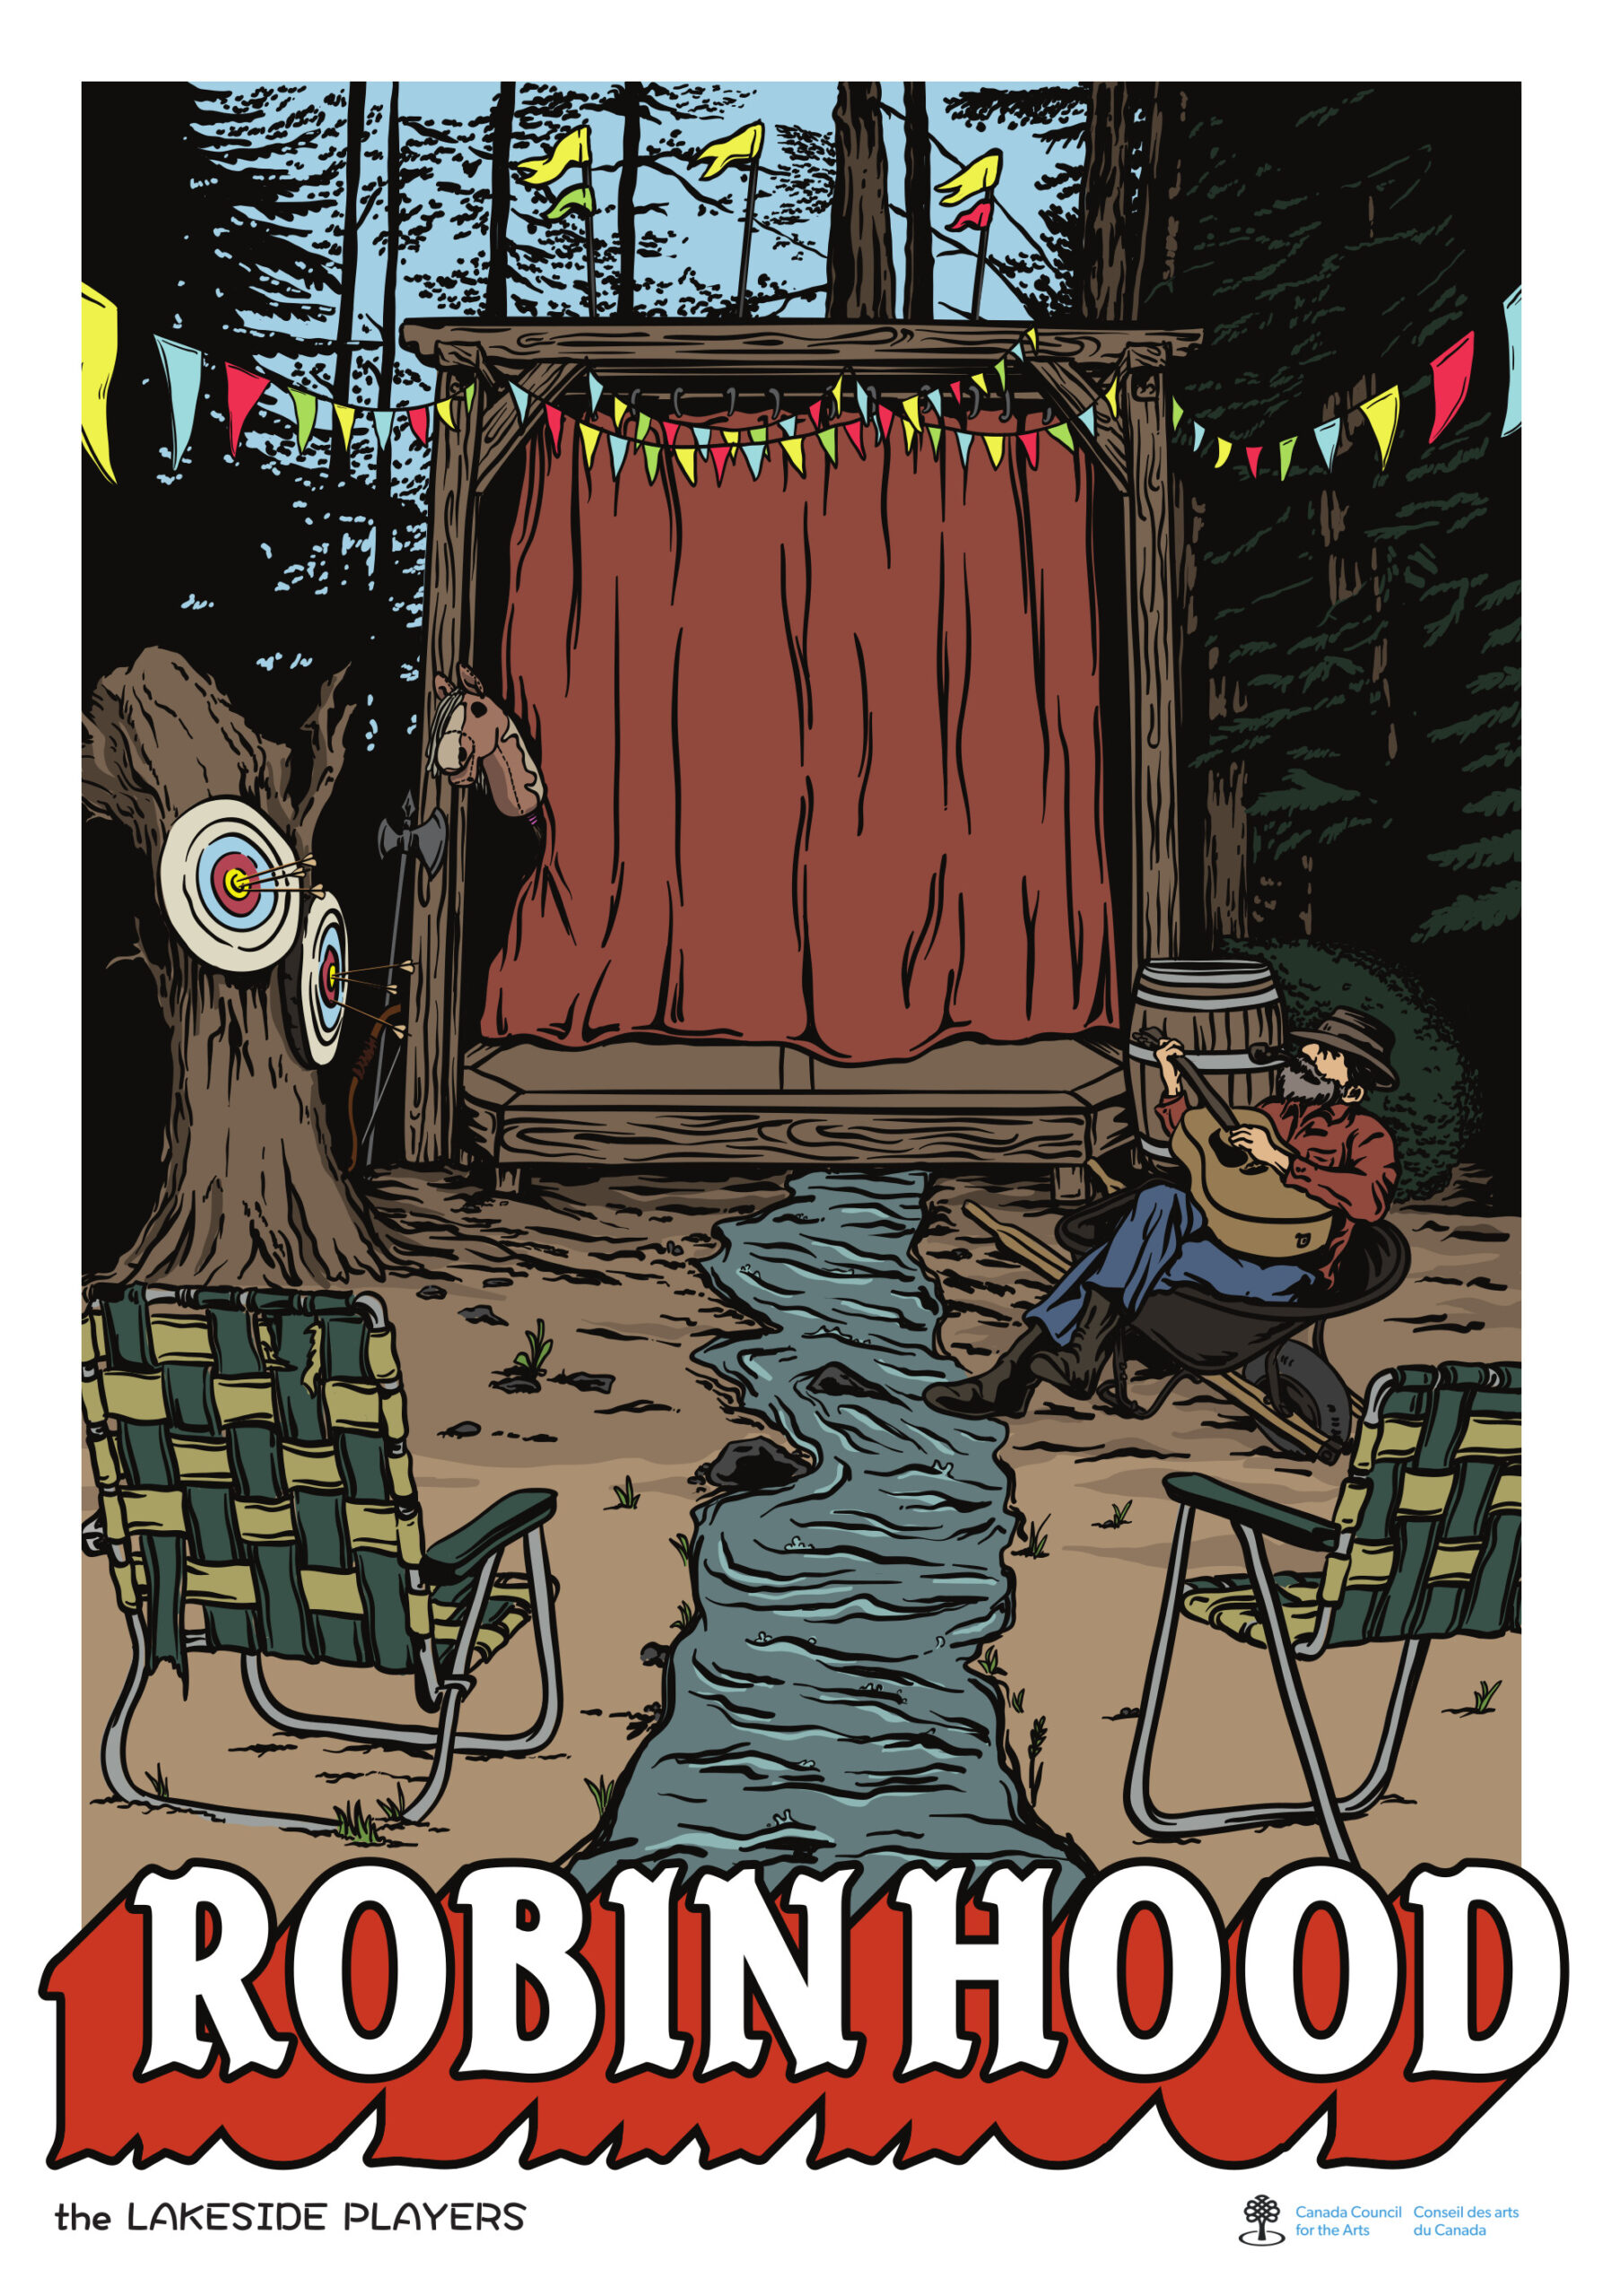 A thin stream leads up to a small, wooden stage that has red curtains pulled across. There is one lawn chair on each side of the stream. A man sits in a wheelbarrow on one side of the stream smoking a pipe and playing a guitar. Trees surround the stage and one has two archery boards attached to it. At the bottom reads: ROBIN HOOD.